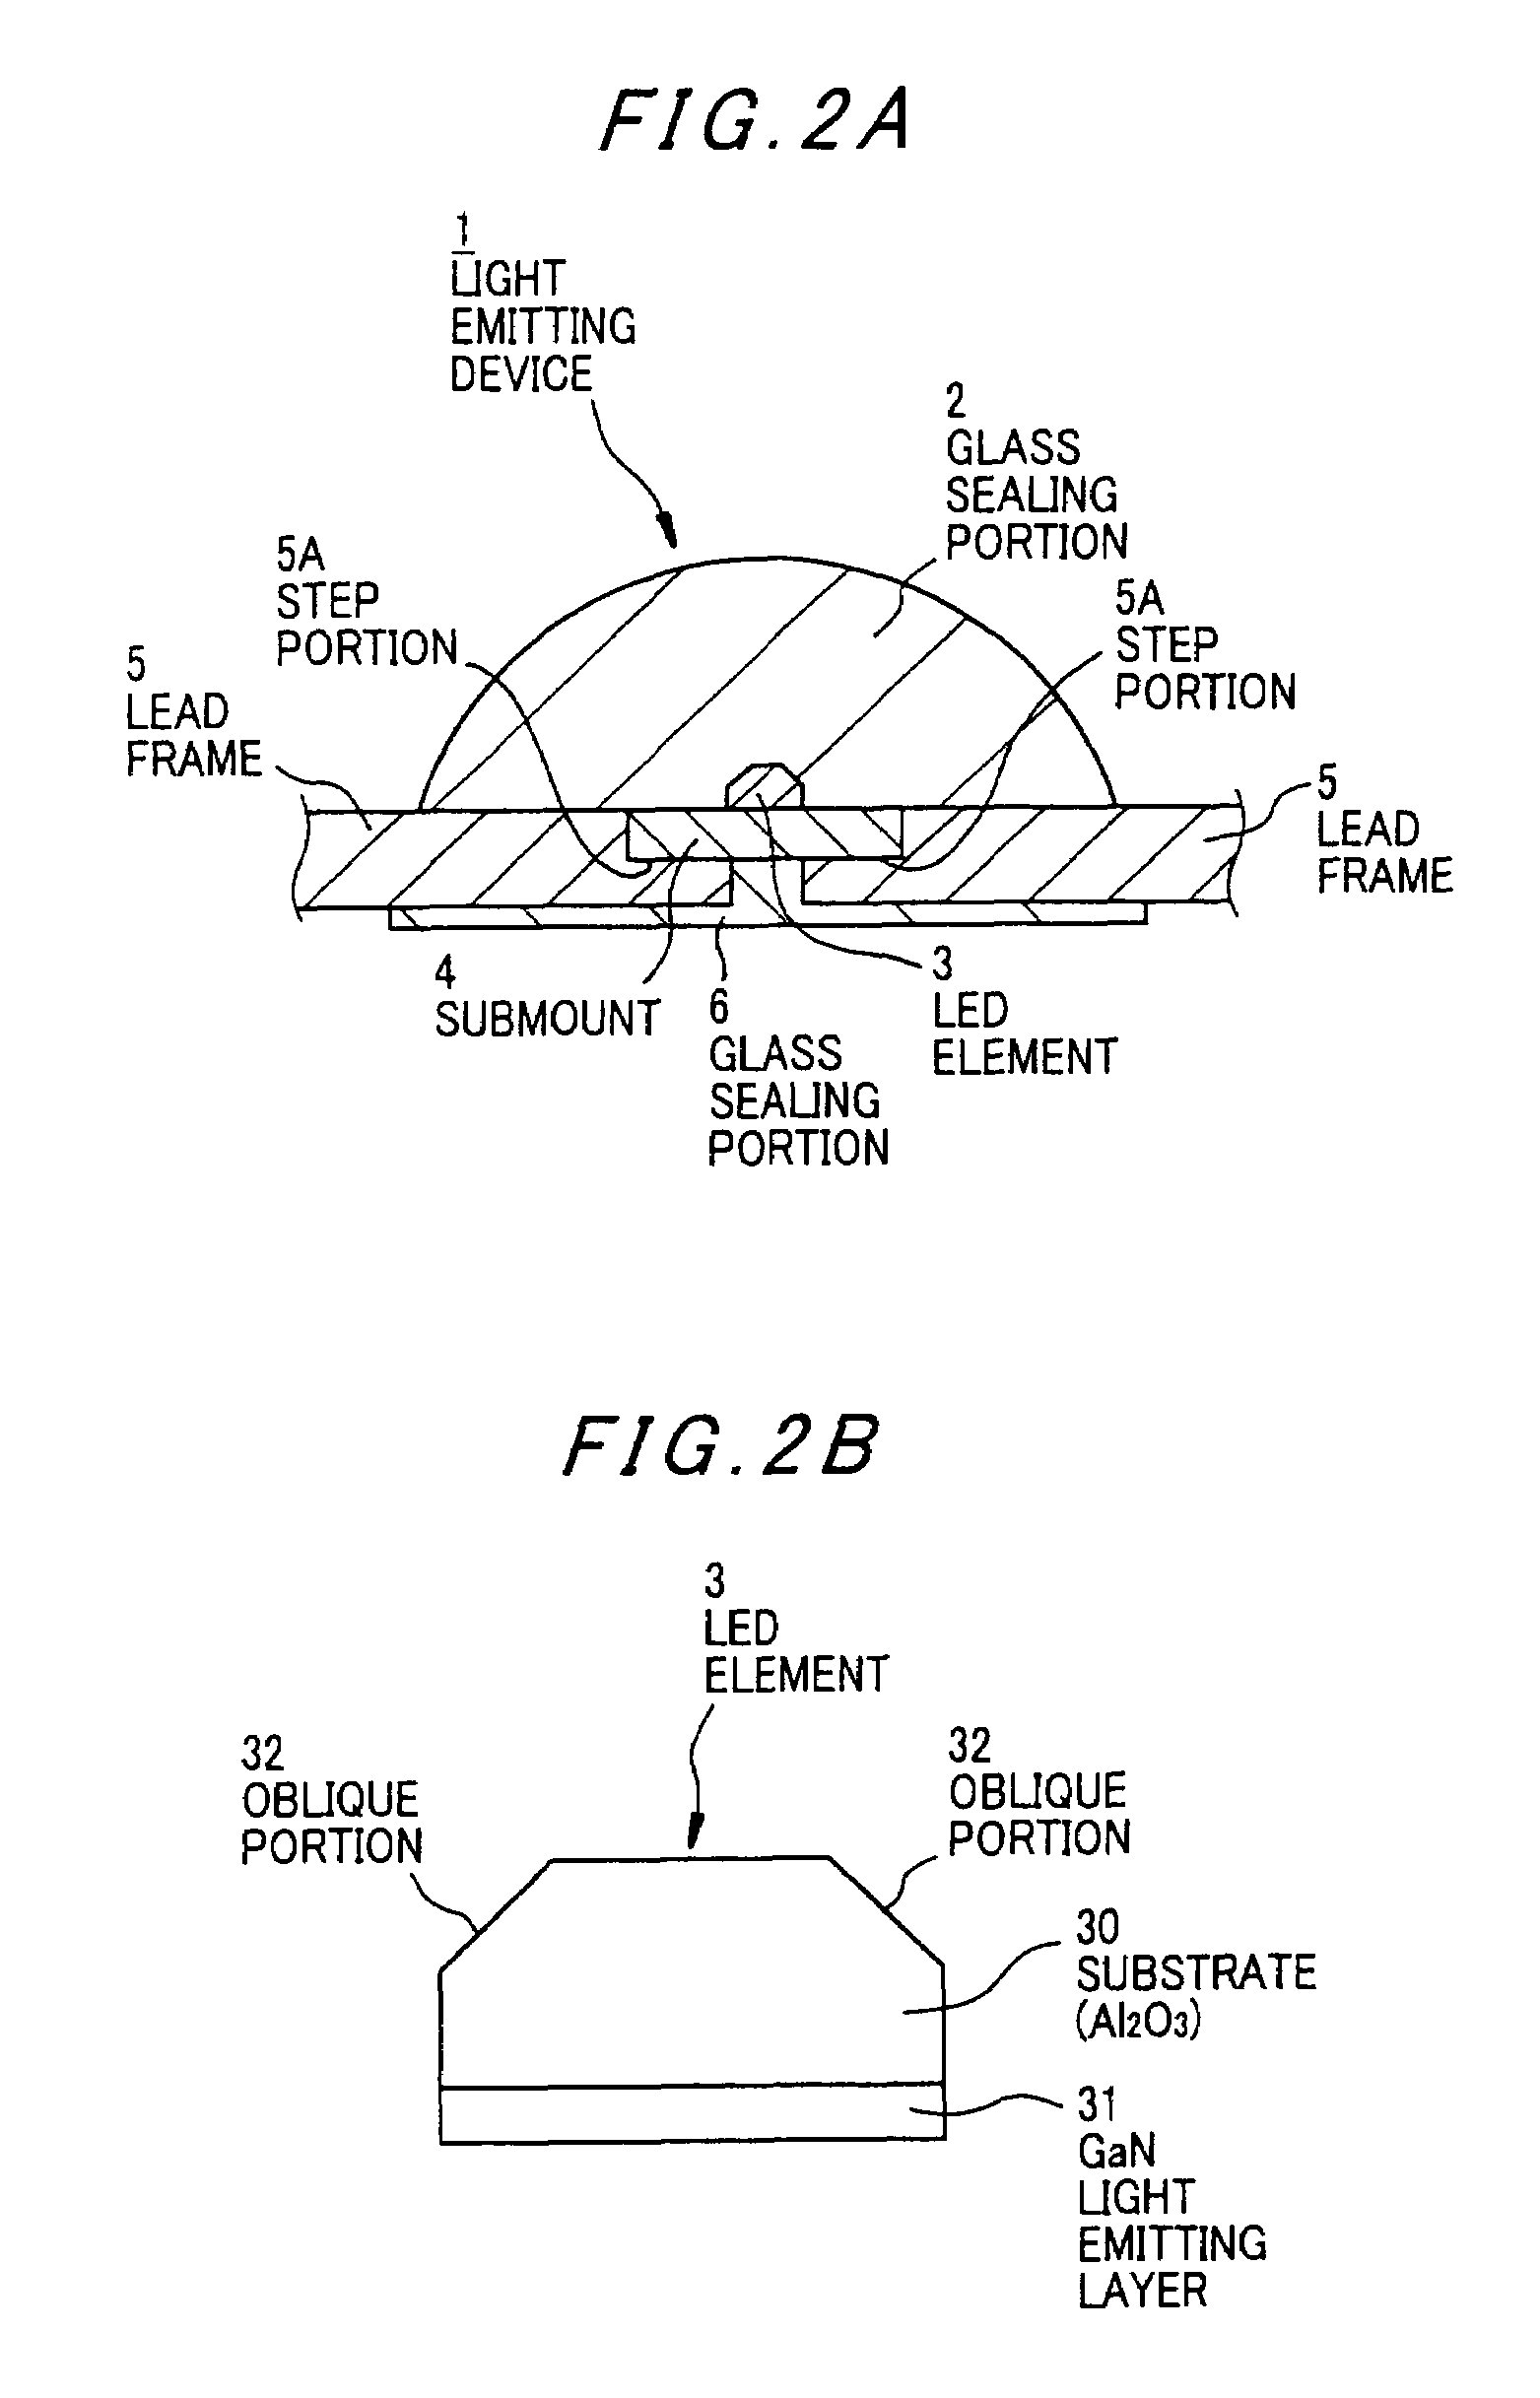 Light emitting device provided with a submount assembly for improved thermal dissipation